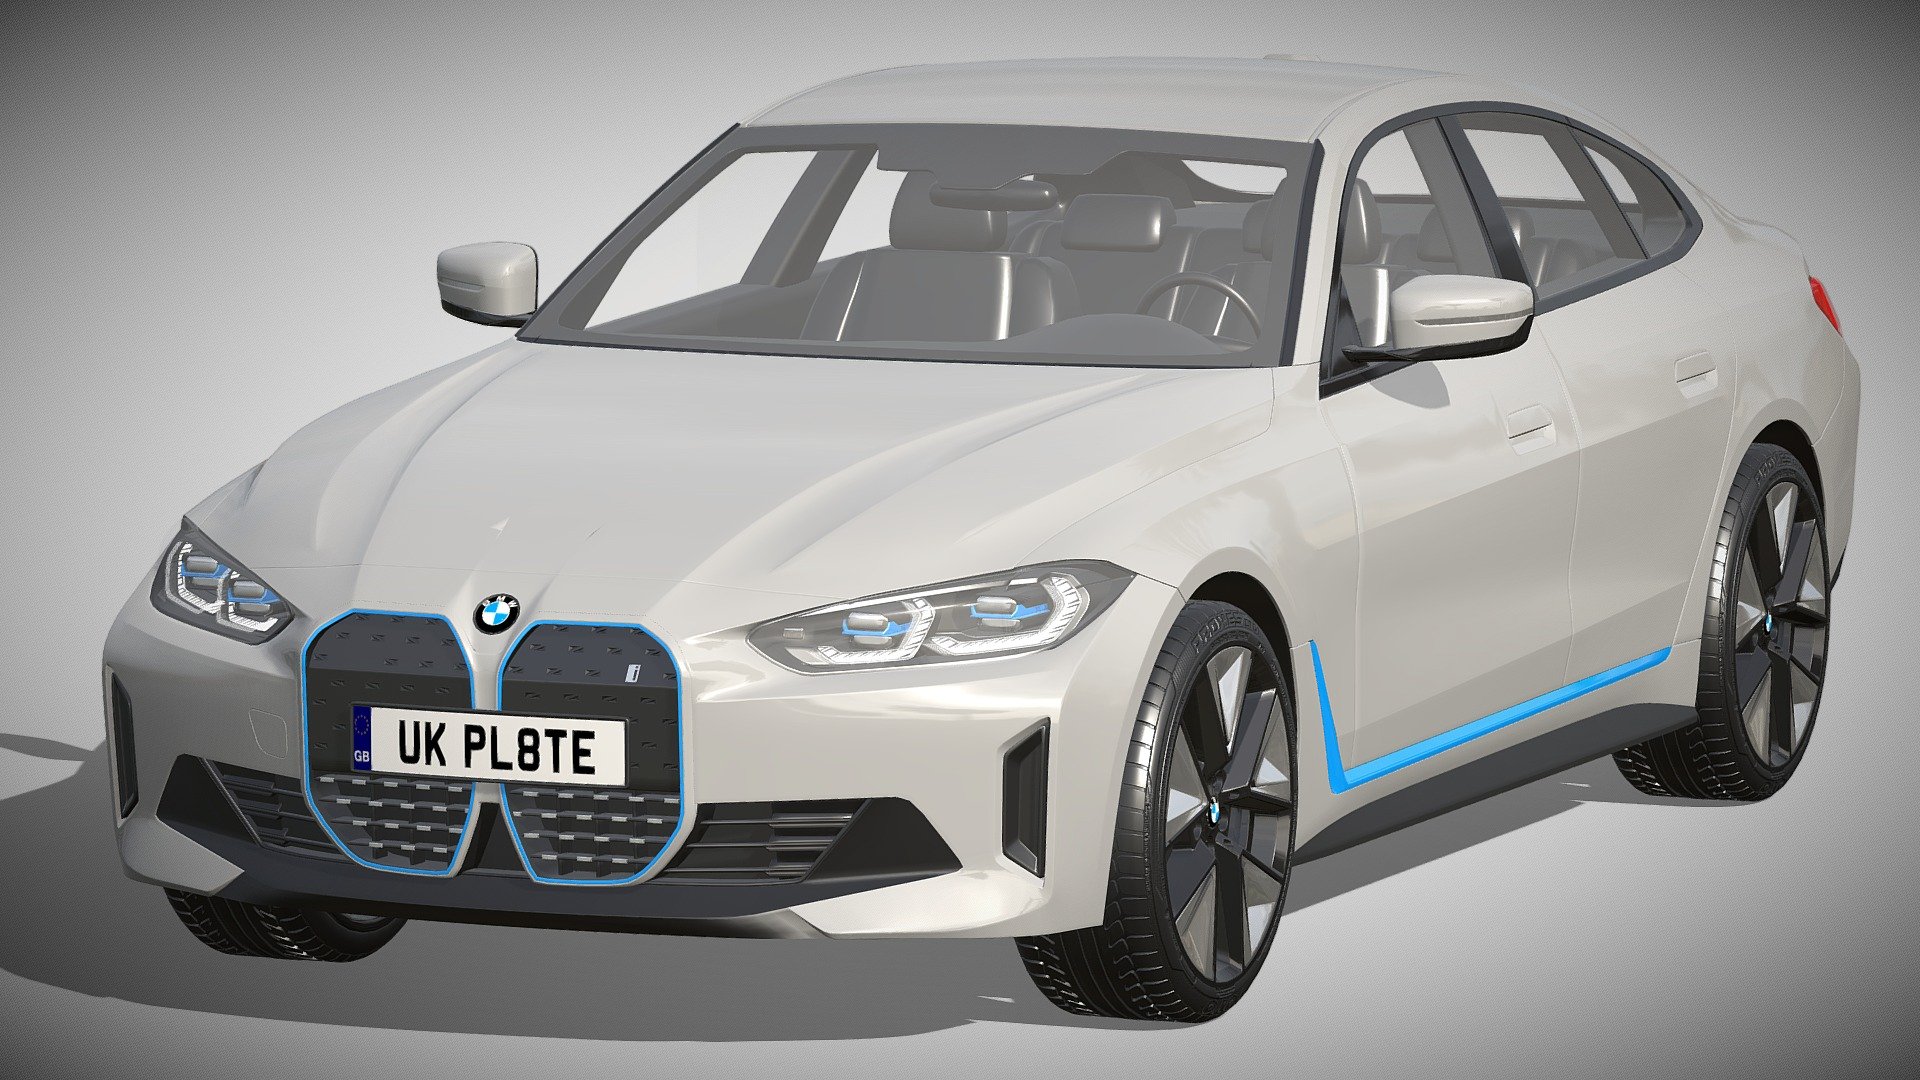 BMW i4

https://www.bmw.de/de/neufahrzeuge/bmw-i/i4/2021/bmw-i4-ueberblick.html

Clean geometry Light weight model, yet completely detailed for HI-Res renders. Use for movies, Advertisements or games

Corona render and materials

All textures include in *.rar files

Lighting setup is not included in the file! - BMW i4 - Buy Royalty Free 3D model by zifir3d 3d model